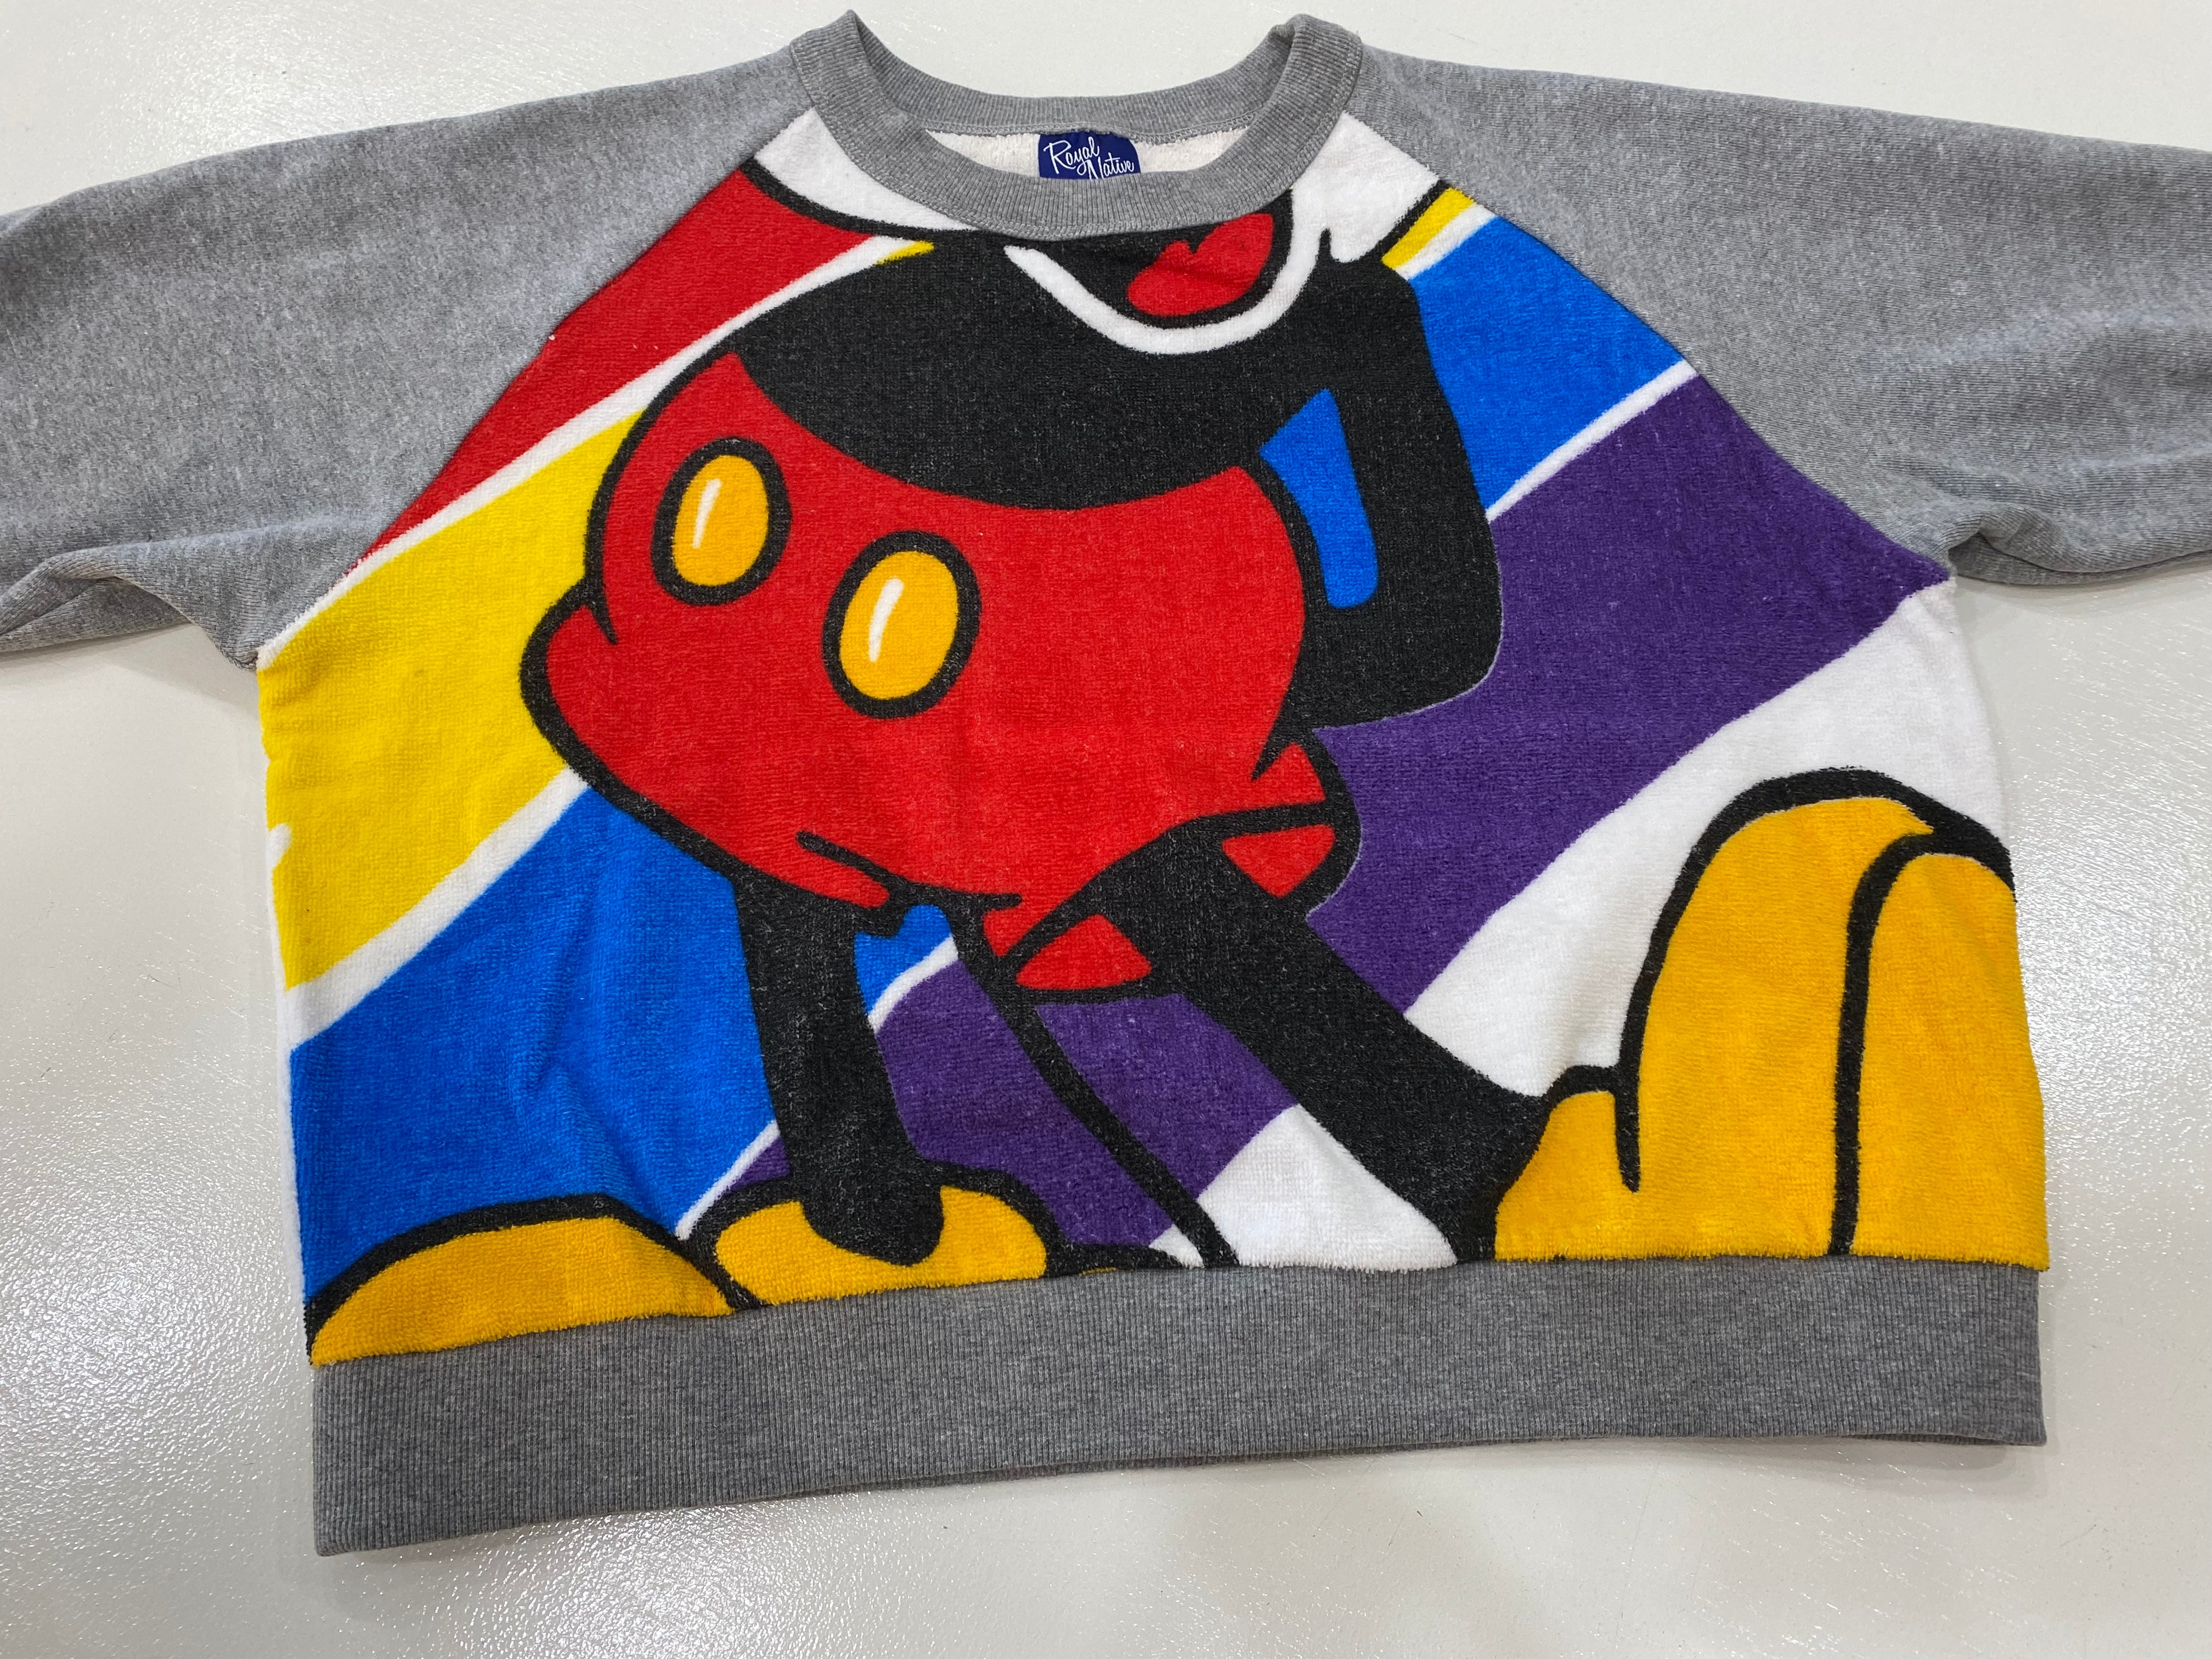 Sunset sweatshirt in Guess Who